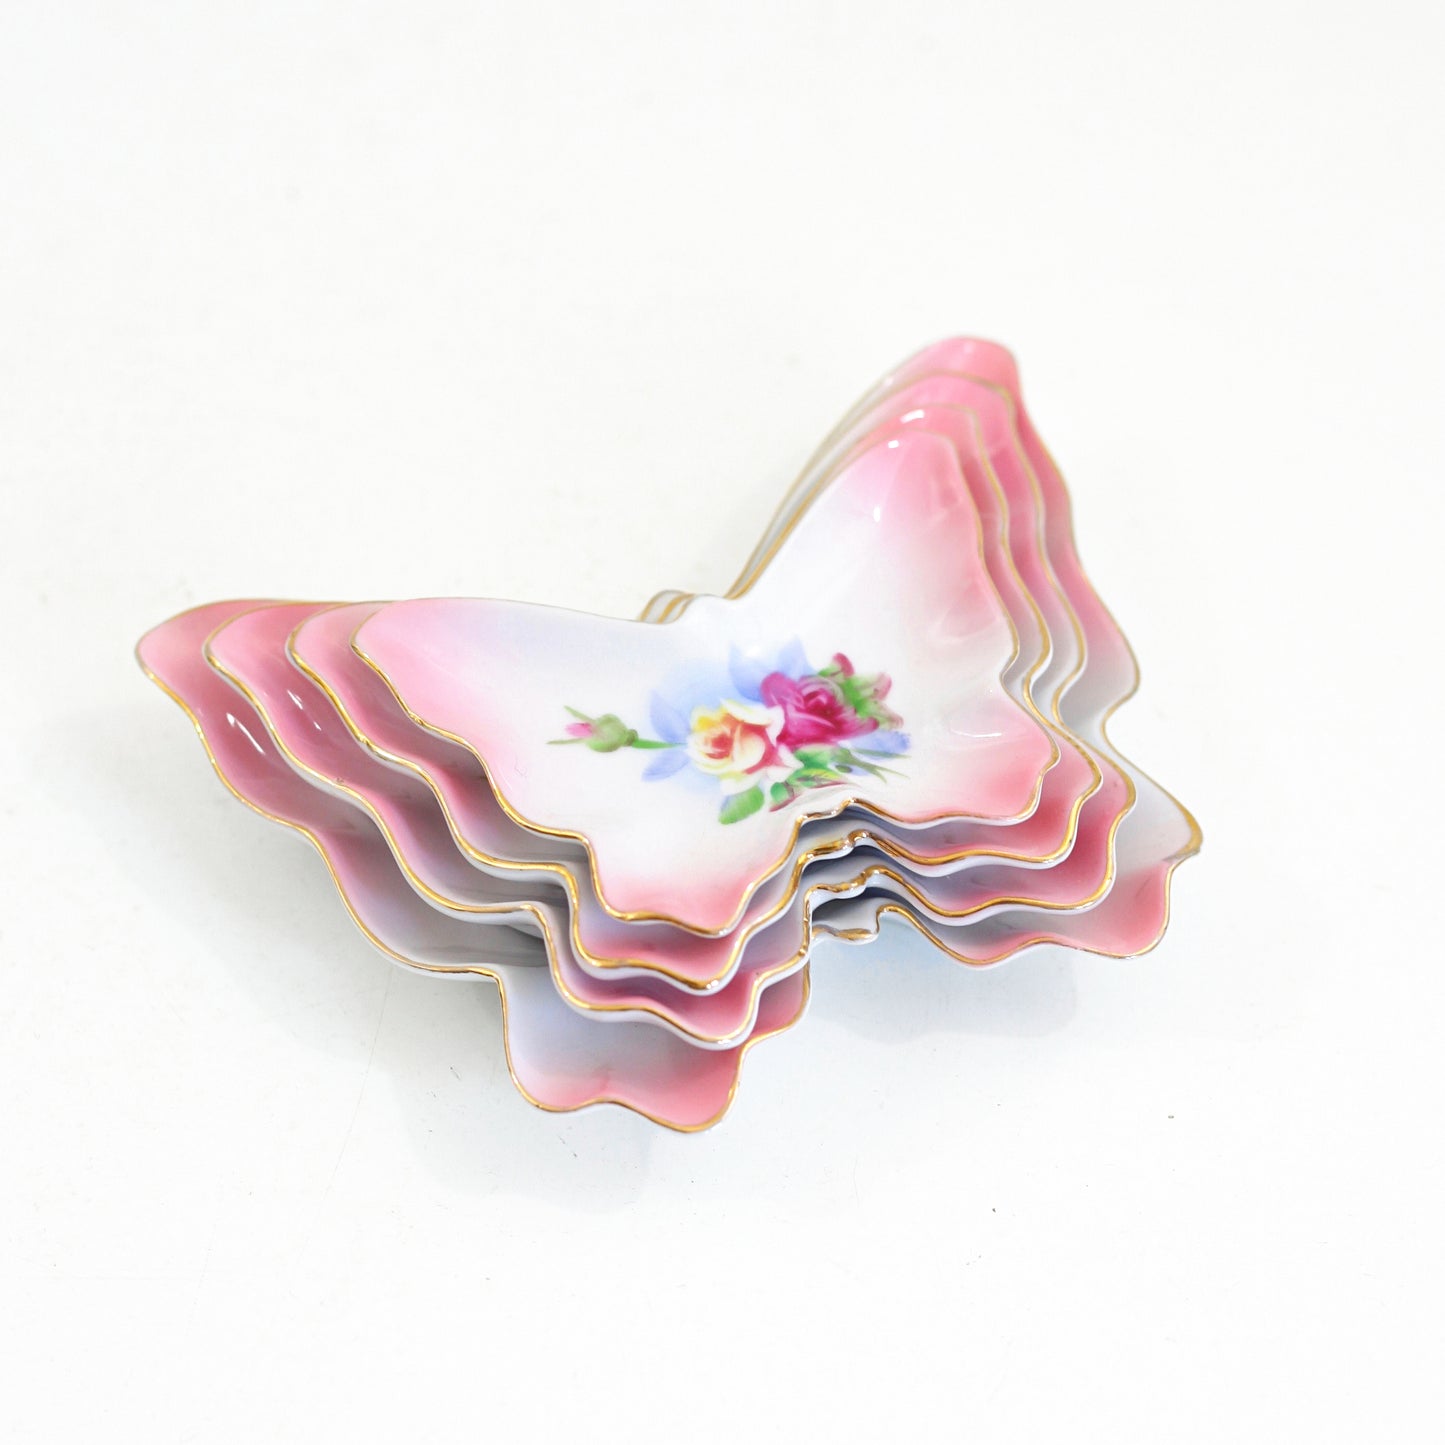 SOLD - Vintage Nesting Butterfly Dishes